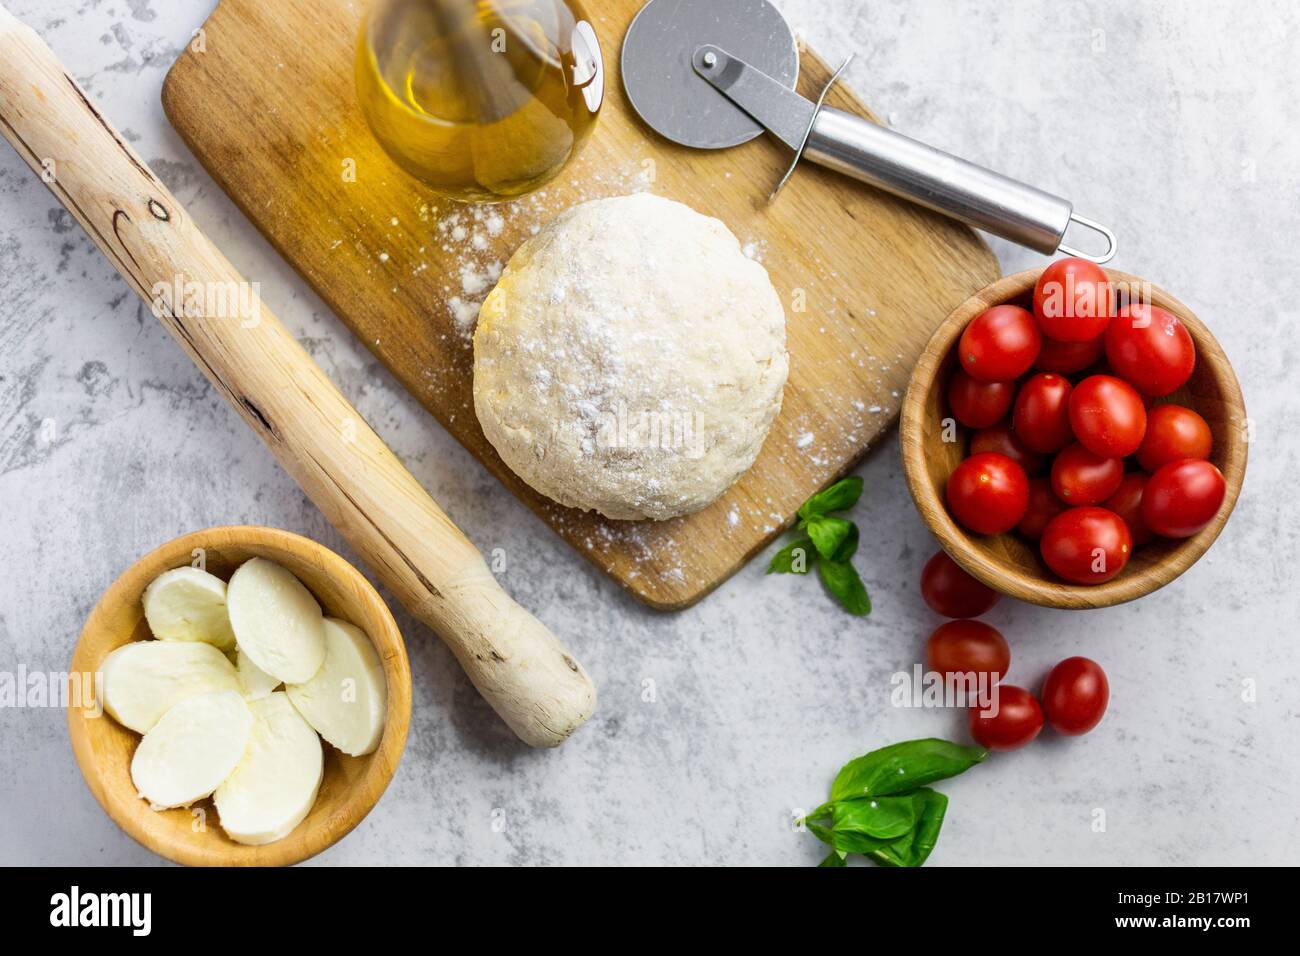 Raw ingredients for making Margharita pizza Stock Photo